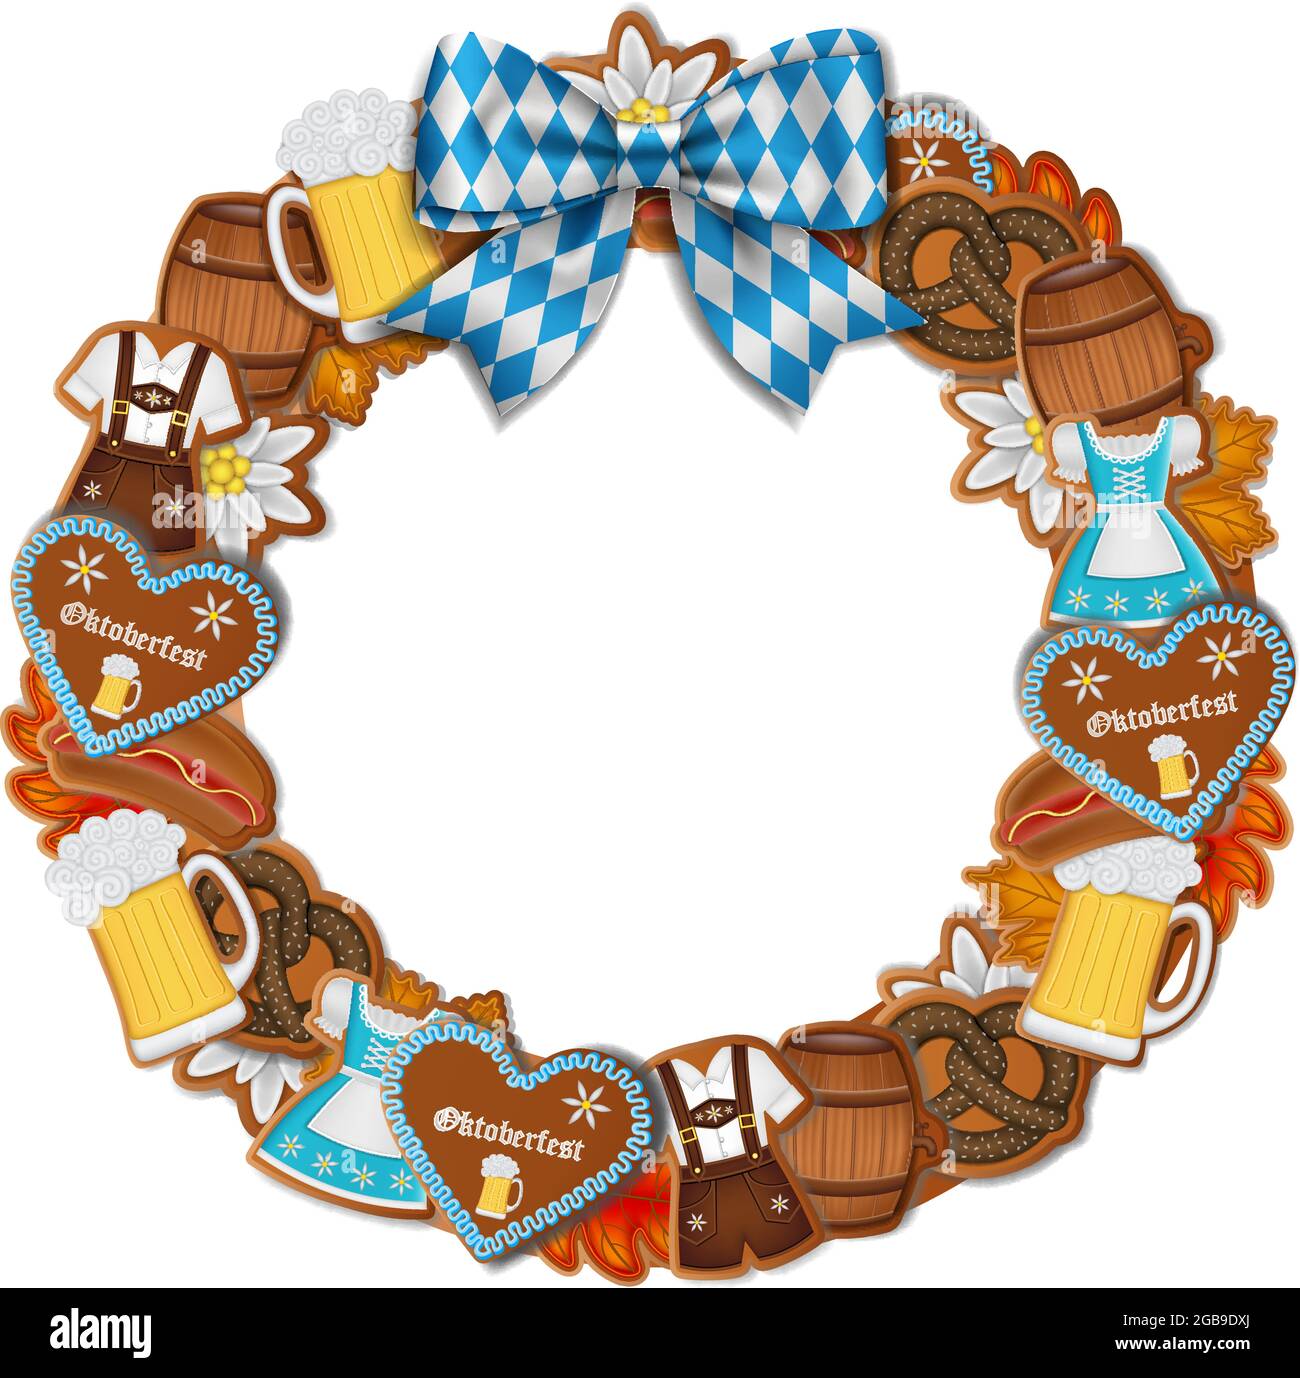 Oktoberfest wreath with gingerbread cookies and blue and white bow Stock Vector